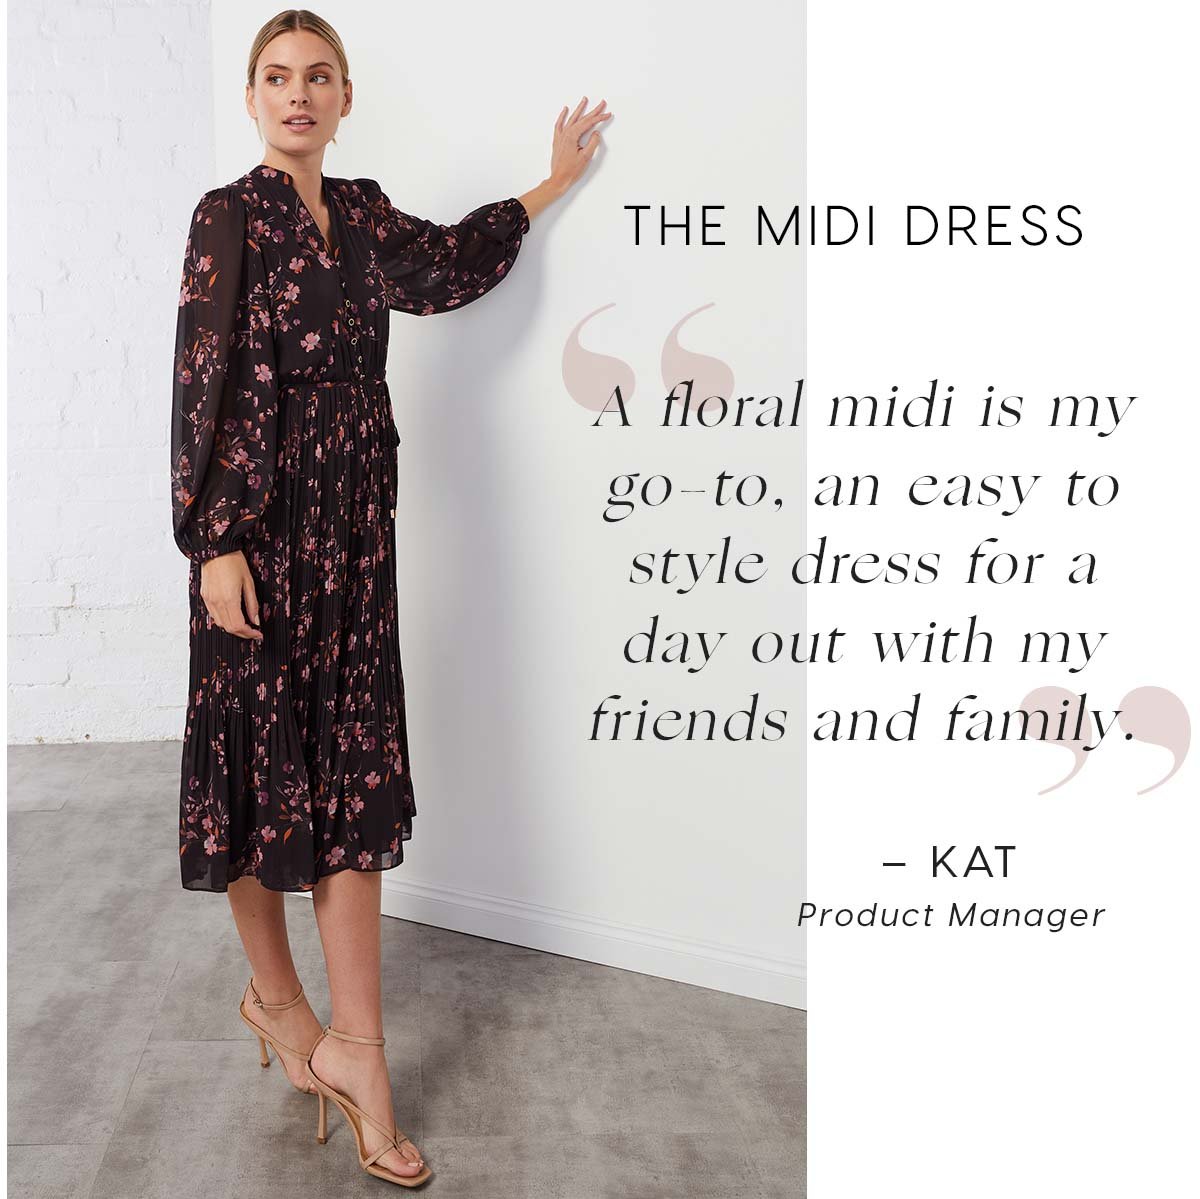 The Midi Dress. A floral midi is my go-to, an easy to style dress for a day out with my friends and family.